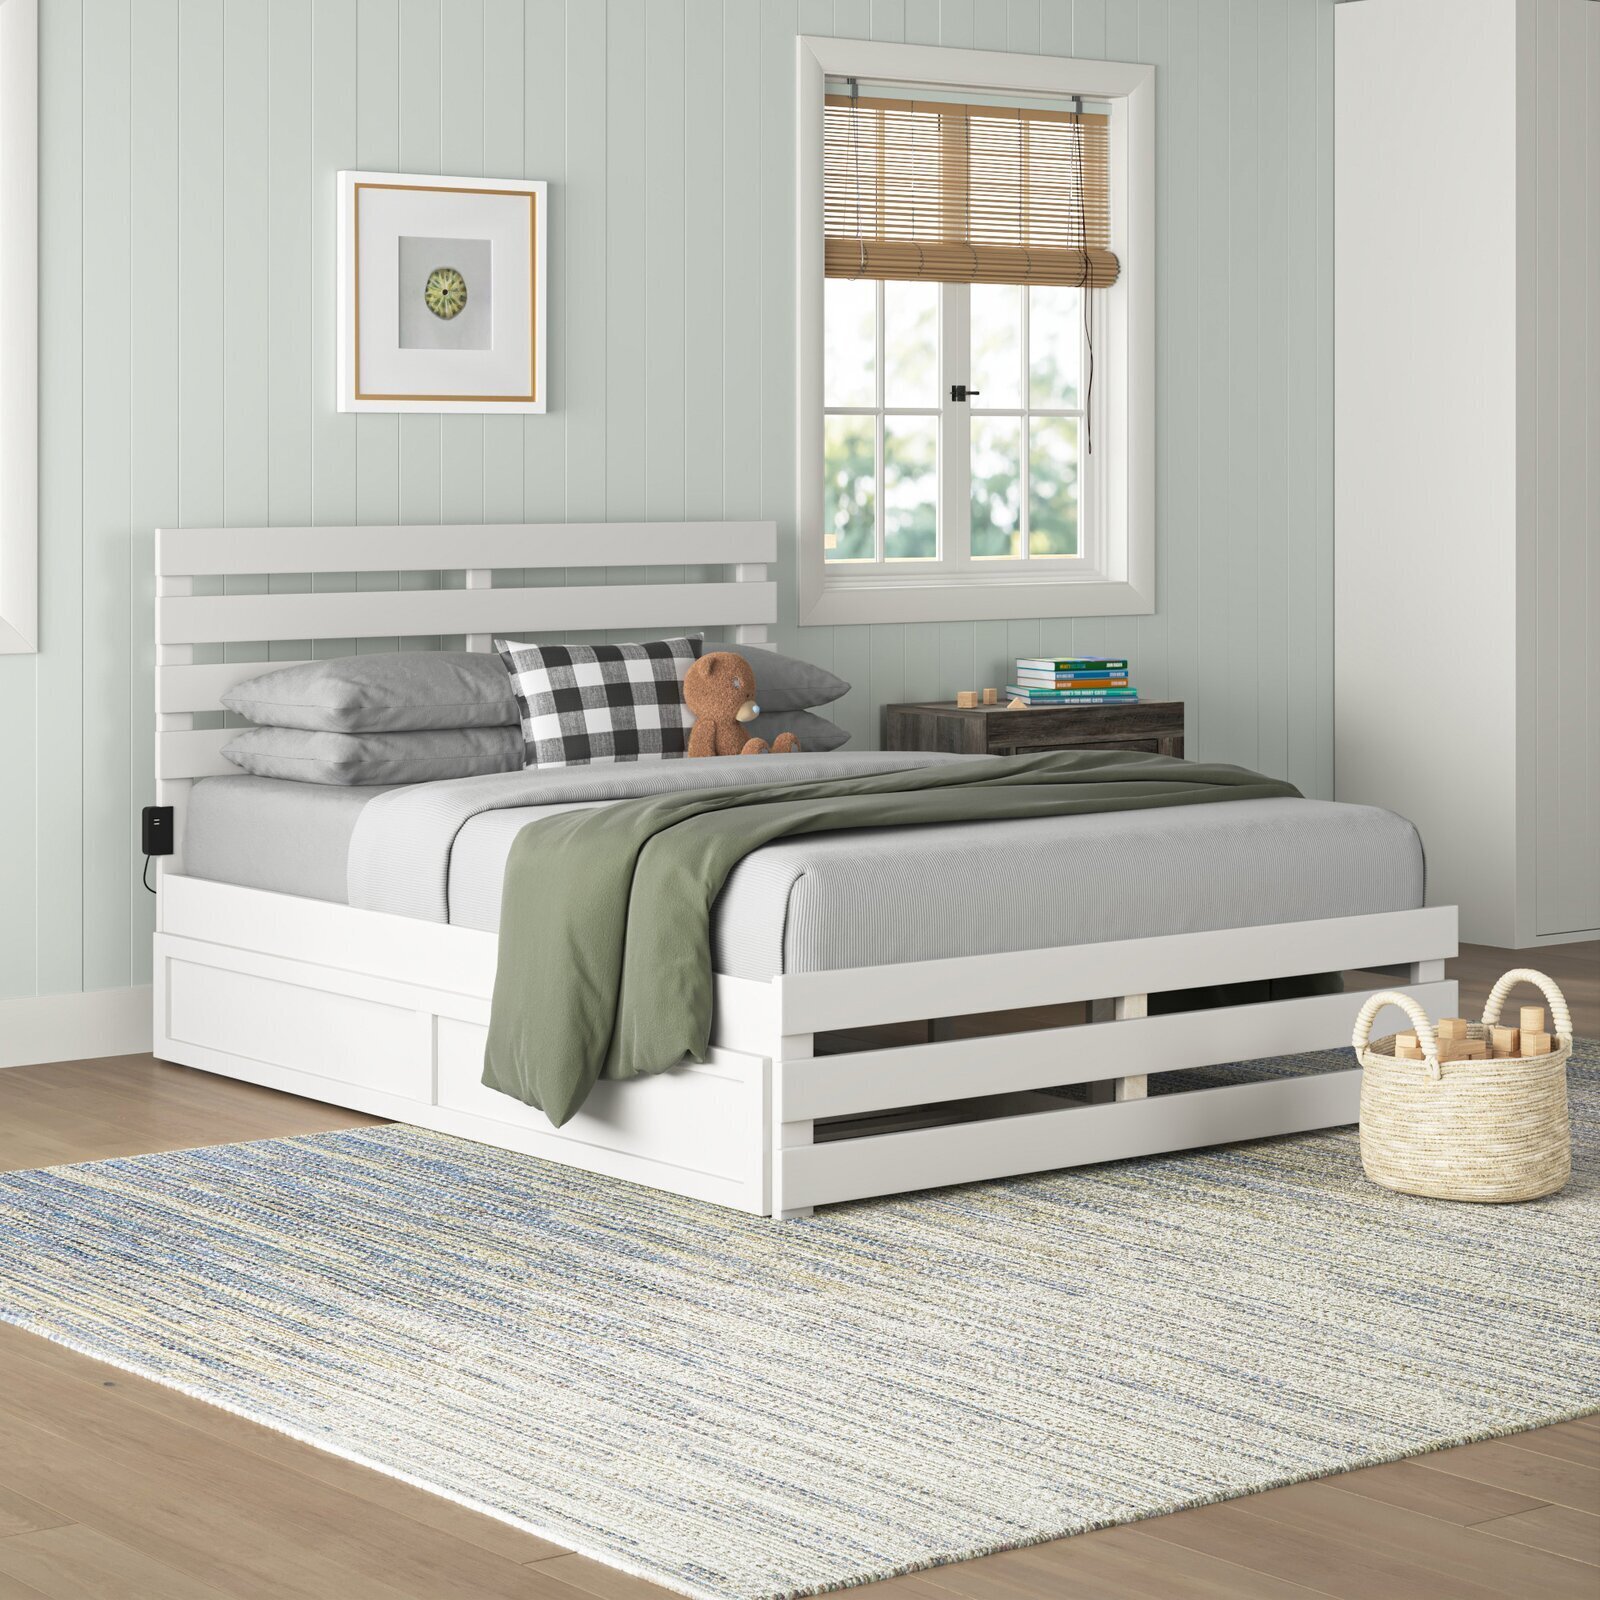 Slatted Queen Bed With Pull Out Bed